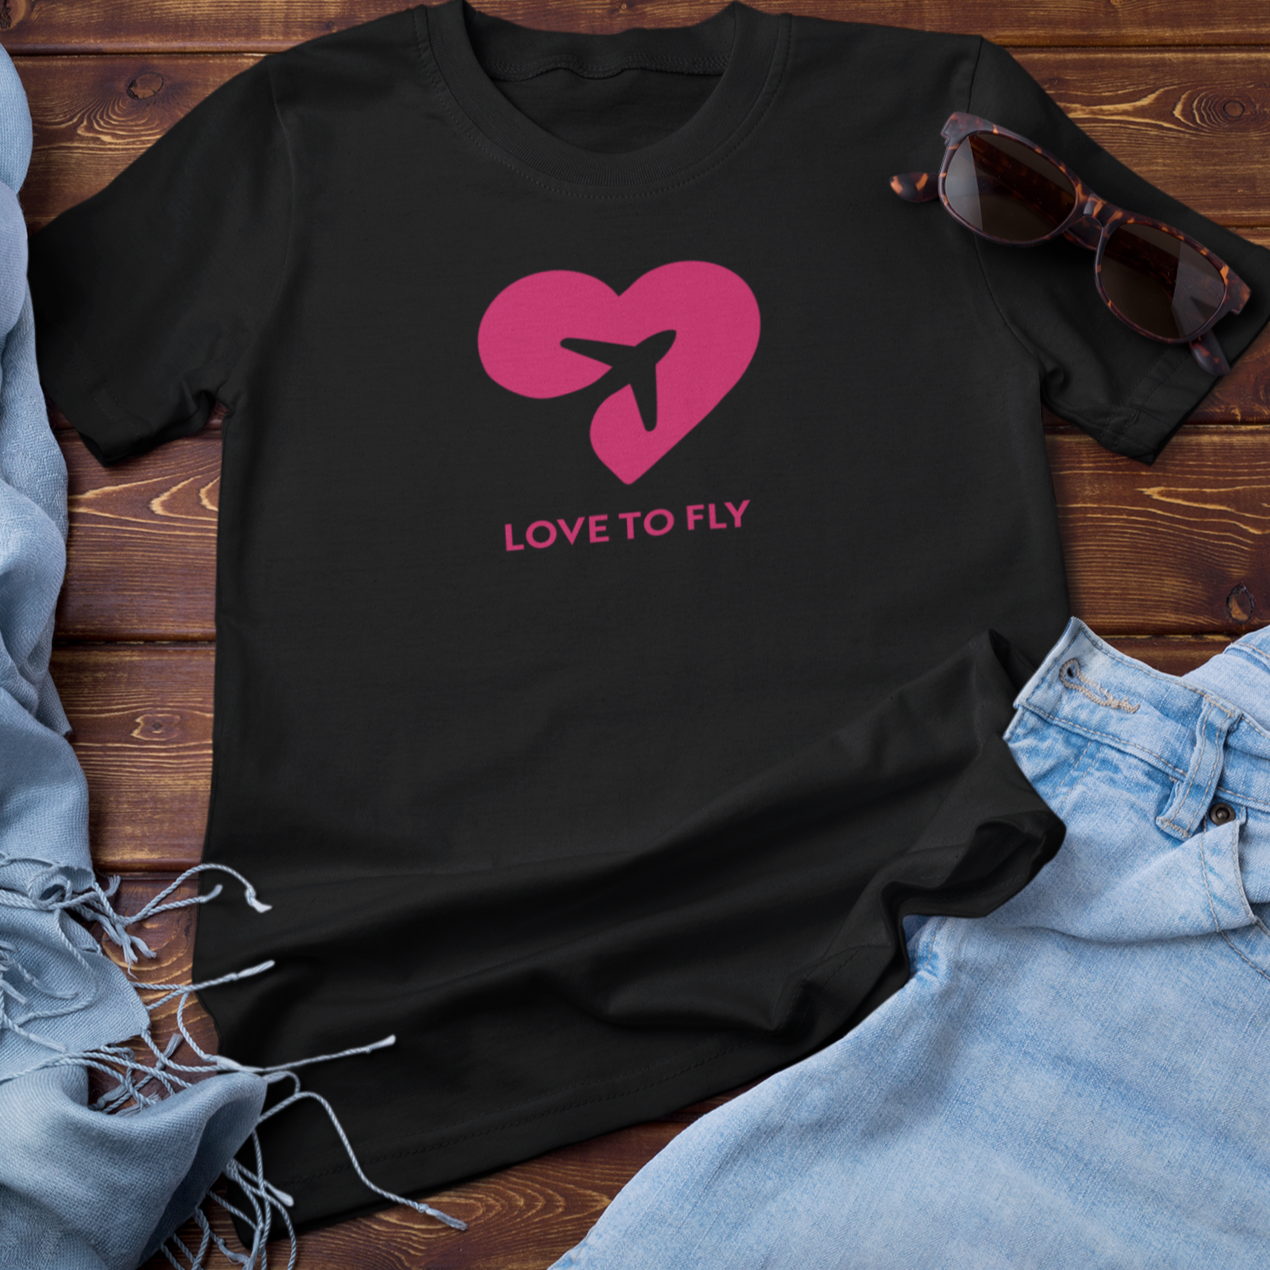 black t-shirt with heart and airplane, love to fly text